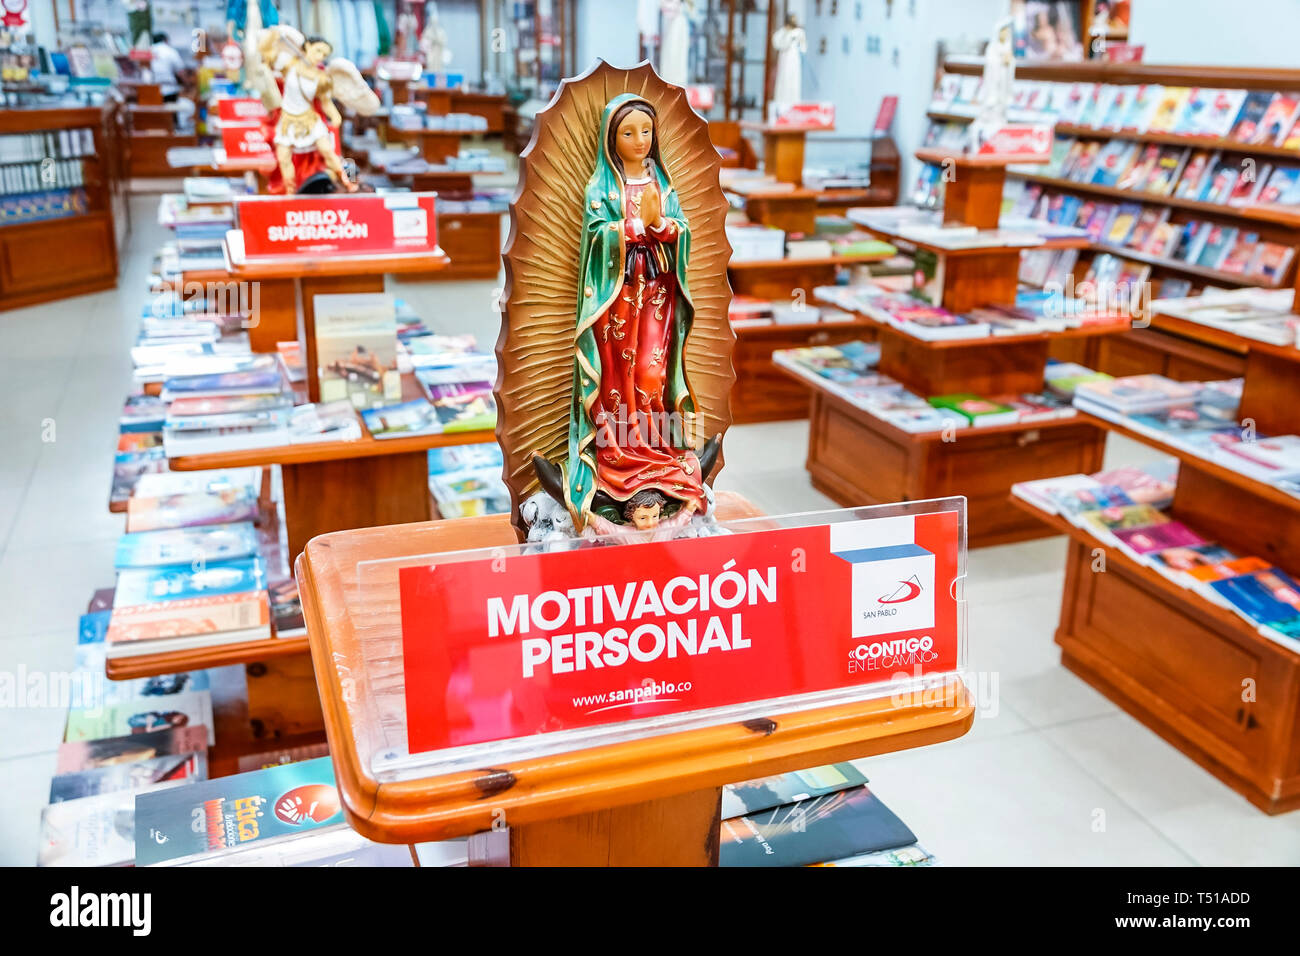 Cartagena Colombia,Society of Saint Paul,San Pablo,Christian religious  bookstore,books,statues,product products display sale,sign,Spanish  language,per Stock Photo - Alamy